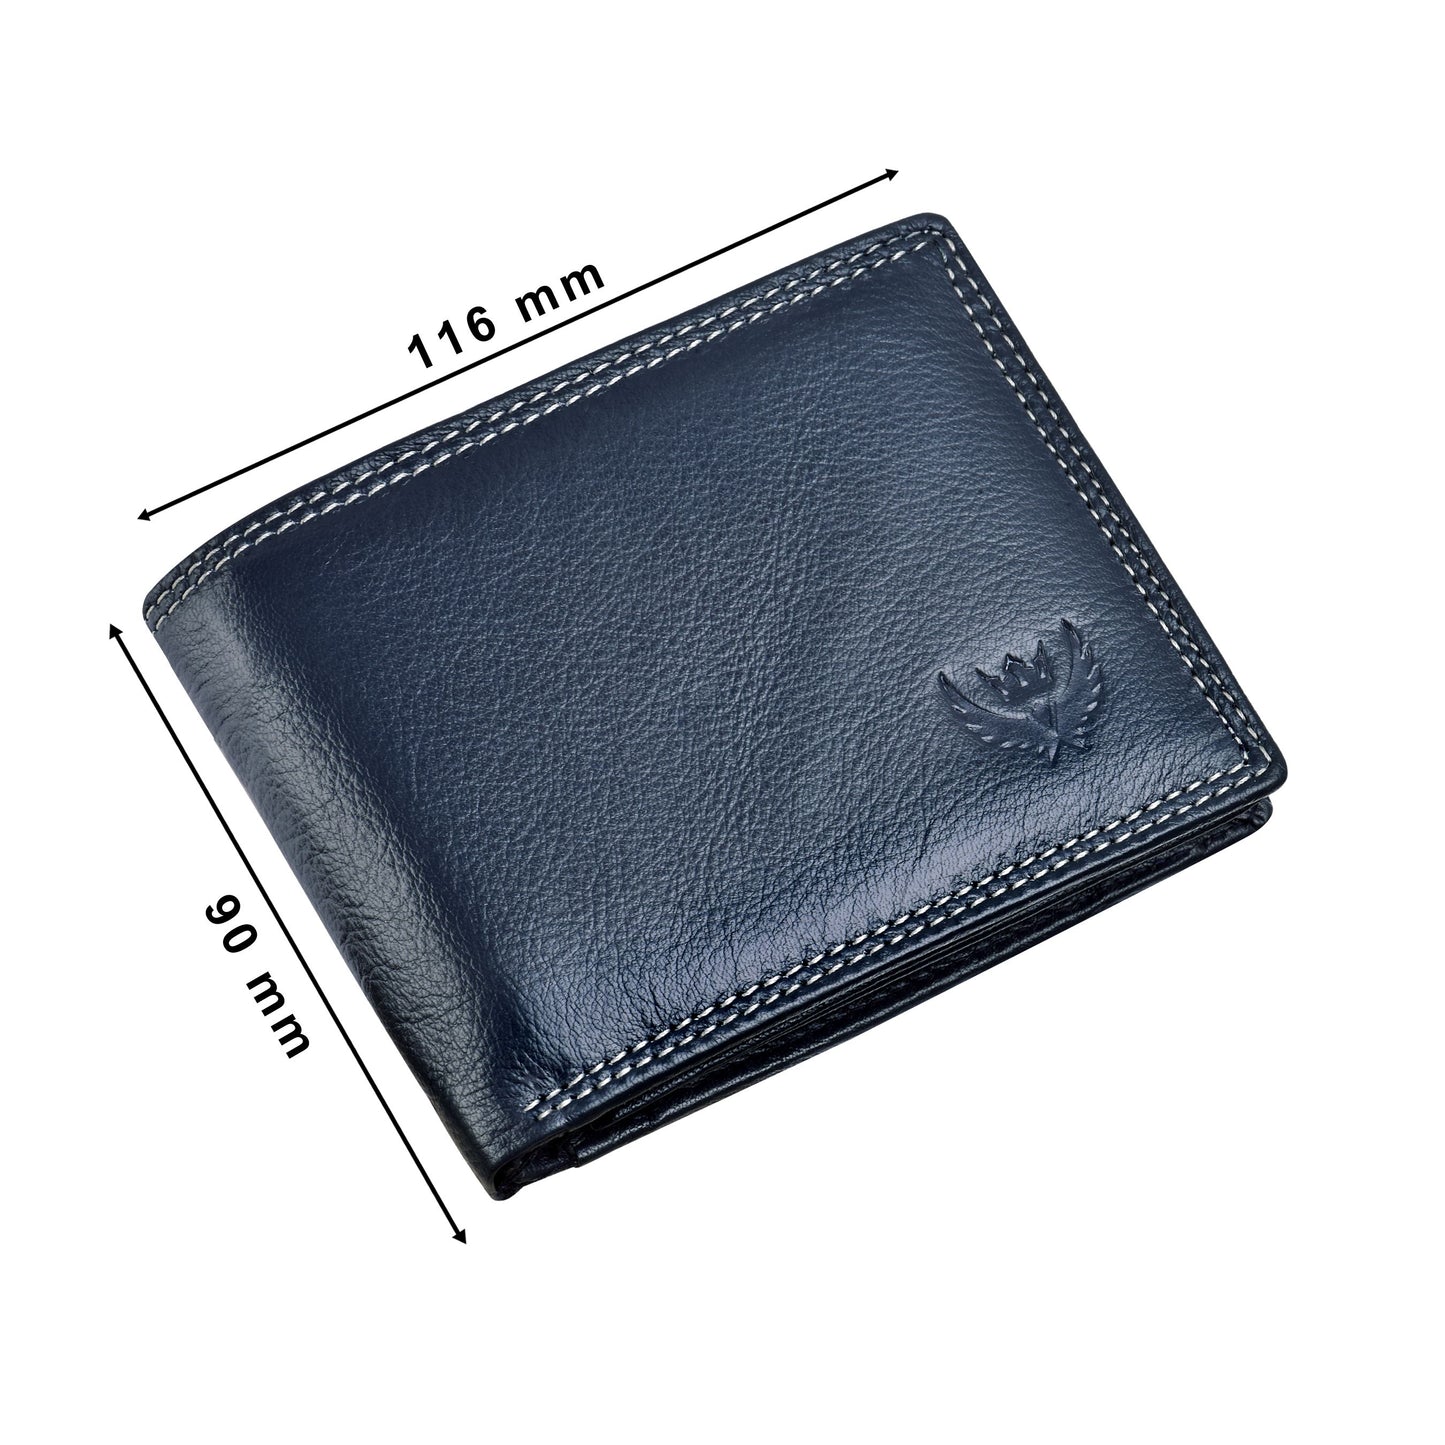 Bi-Fold Premium Blue RFID Blocking Grain Leather Wallet for Men with Double ID Card Flap, 9 Credit Card Pockets & Coin Pocket Feature